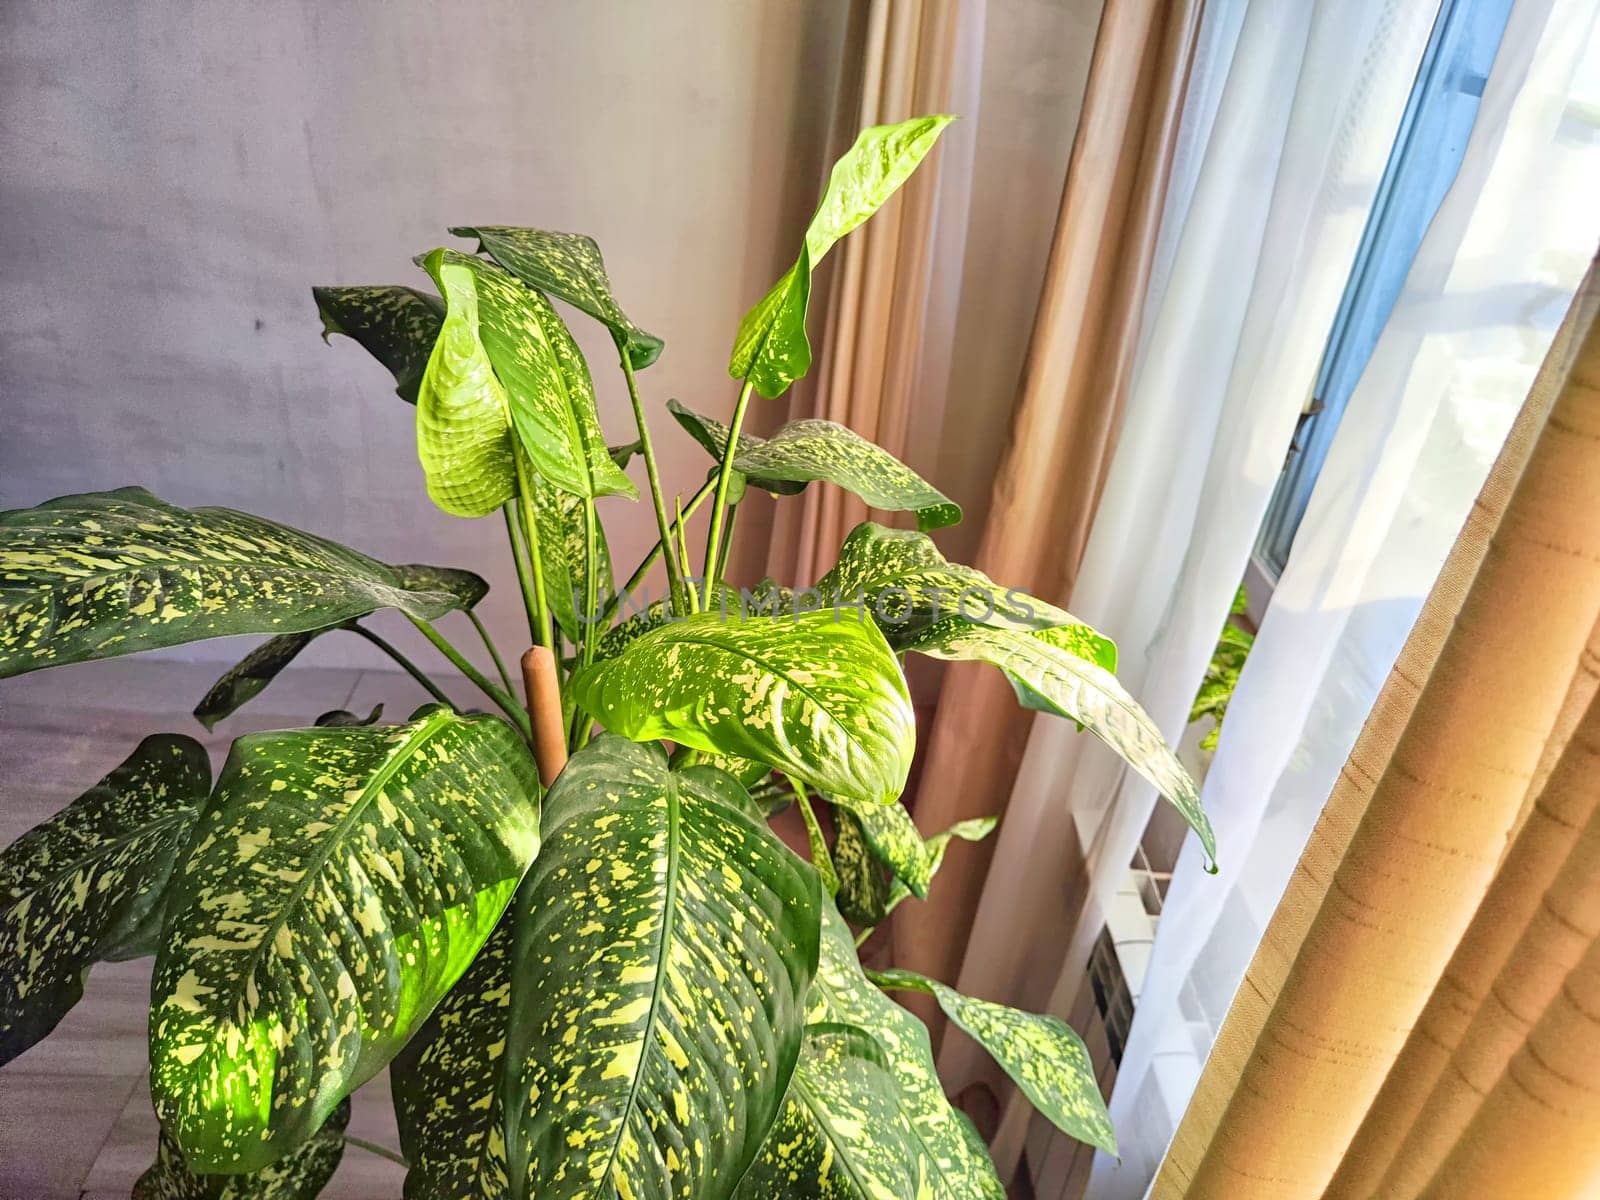 Dieffenbachia plant in a pot by the window with curtains. Interior in light colors. Background with a plant with green leaves and fabric by keleny